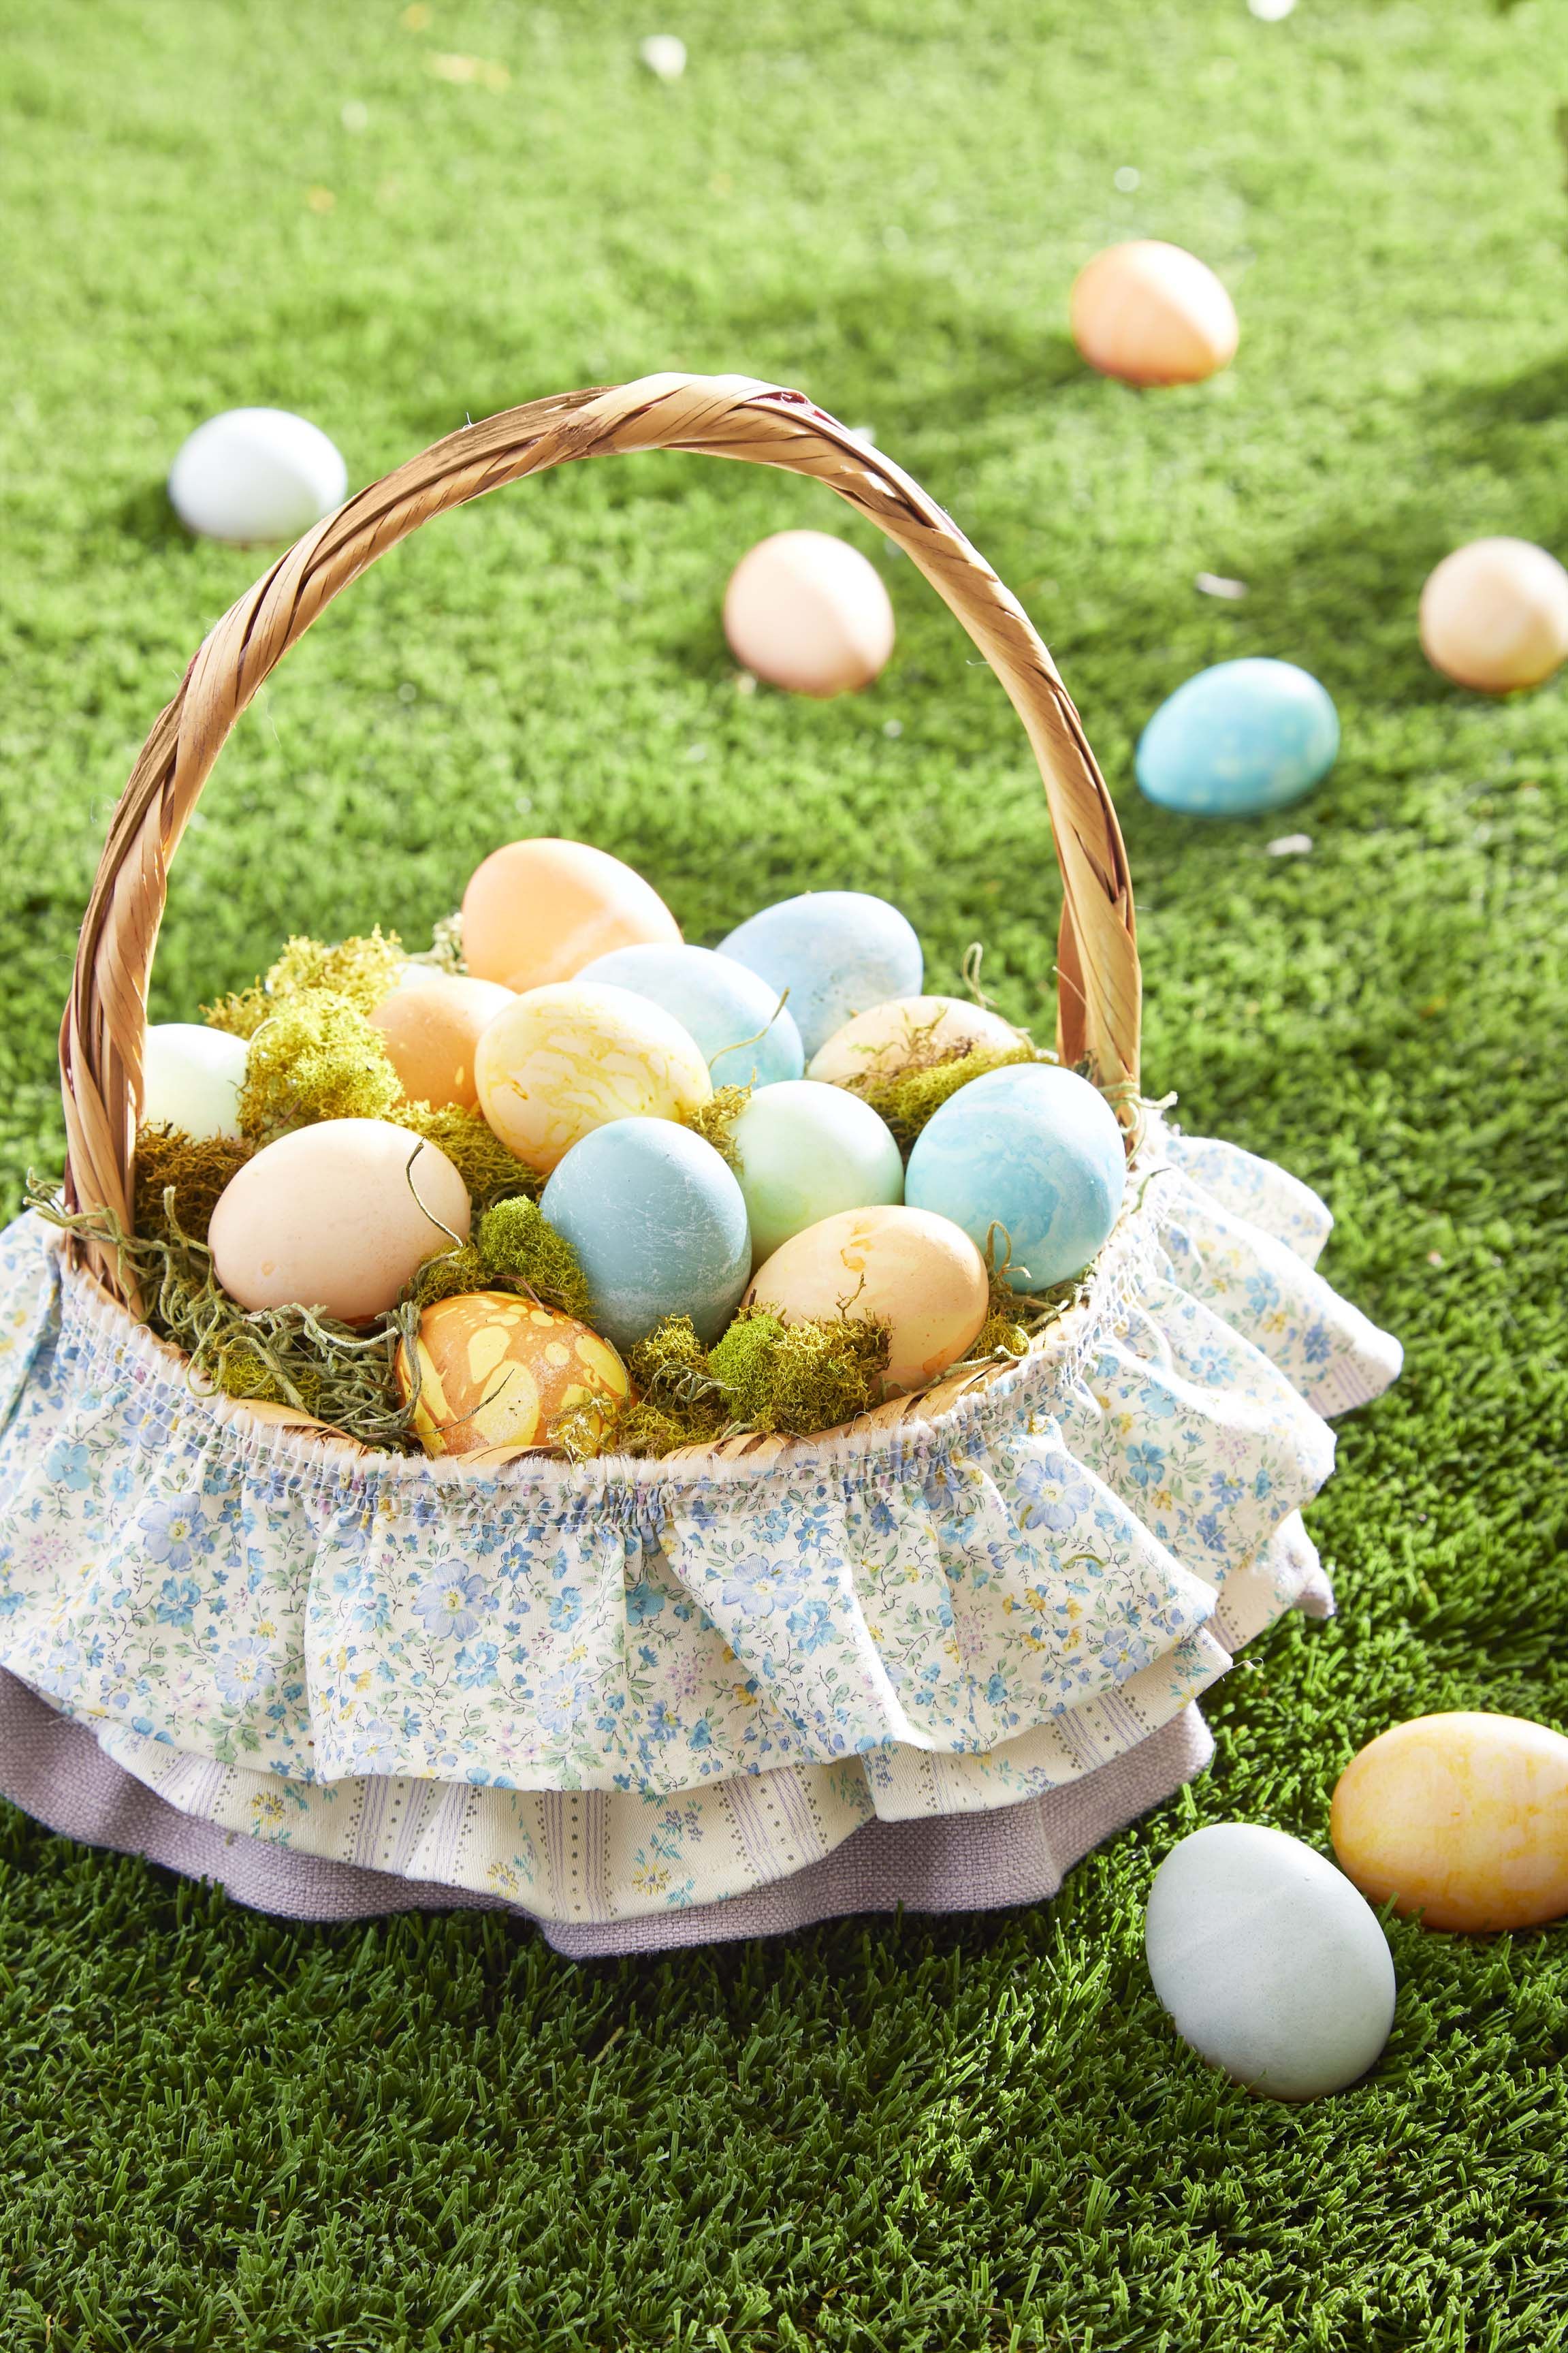 10 Easy Easter Craft Ideas to Make at Home